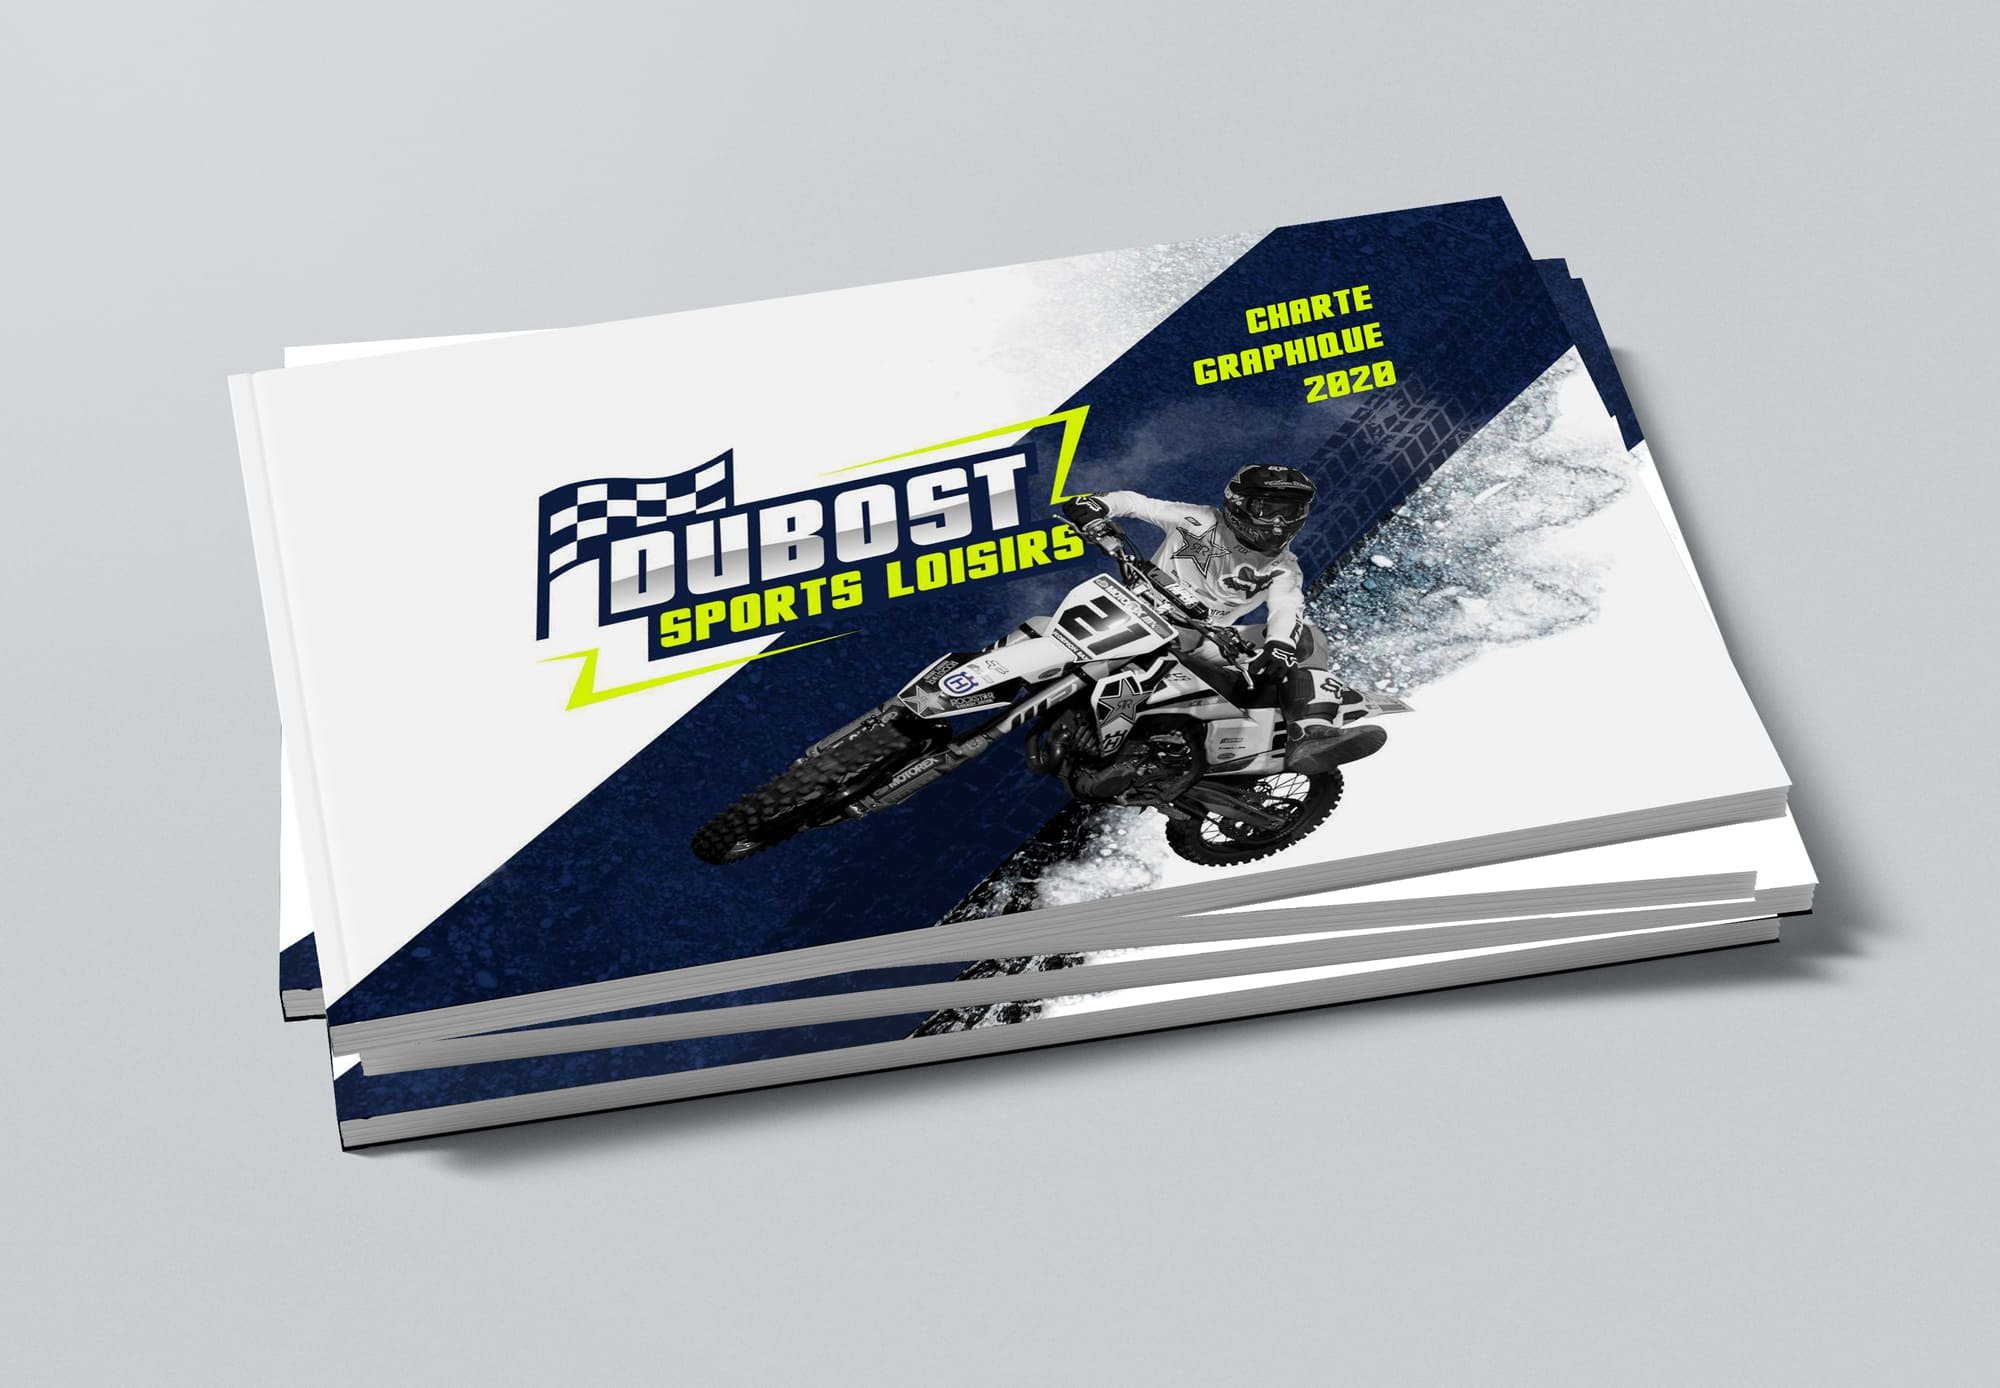 Charte graphique : Dubost Sports Loisirs (16 pages)